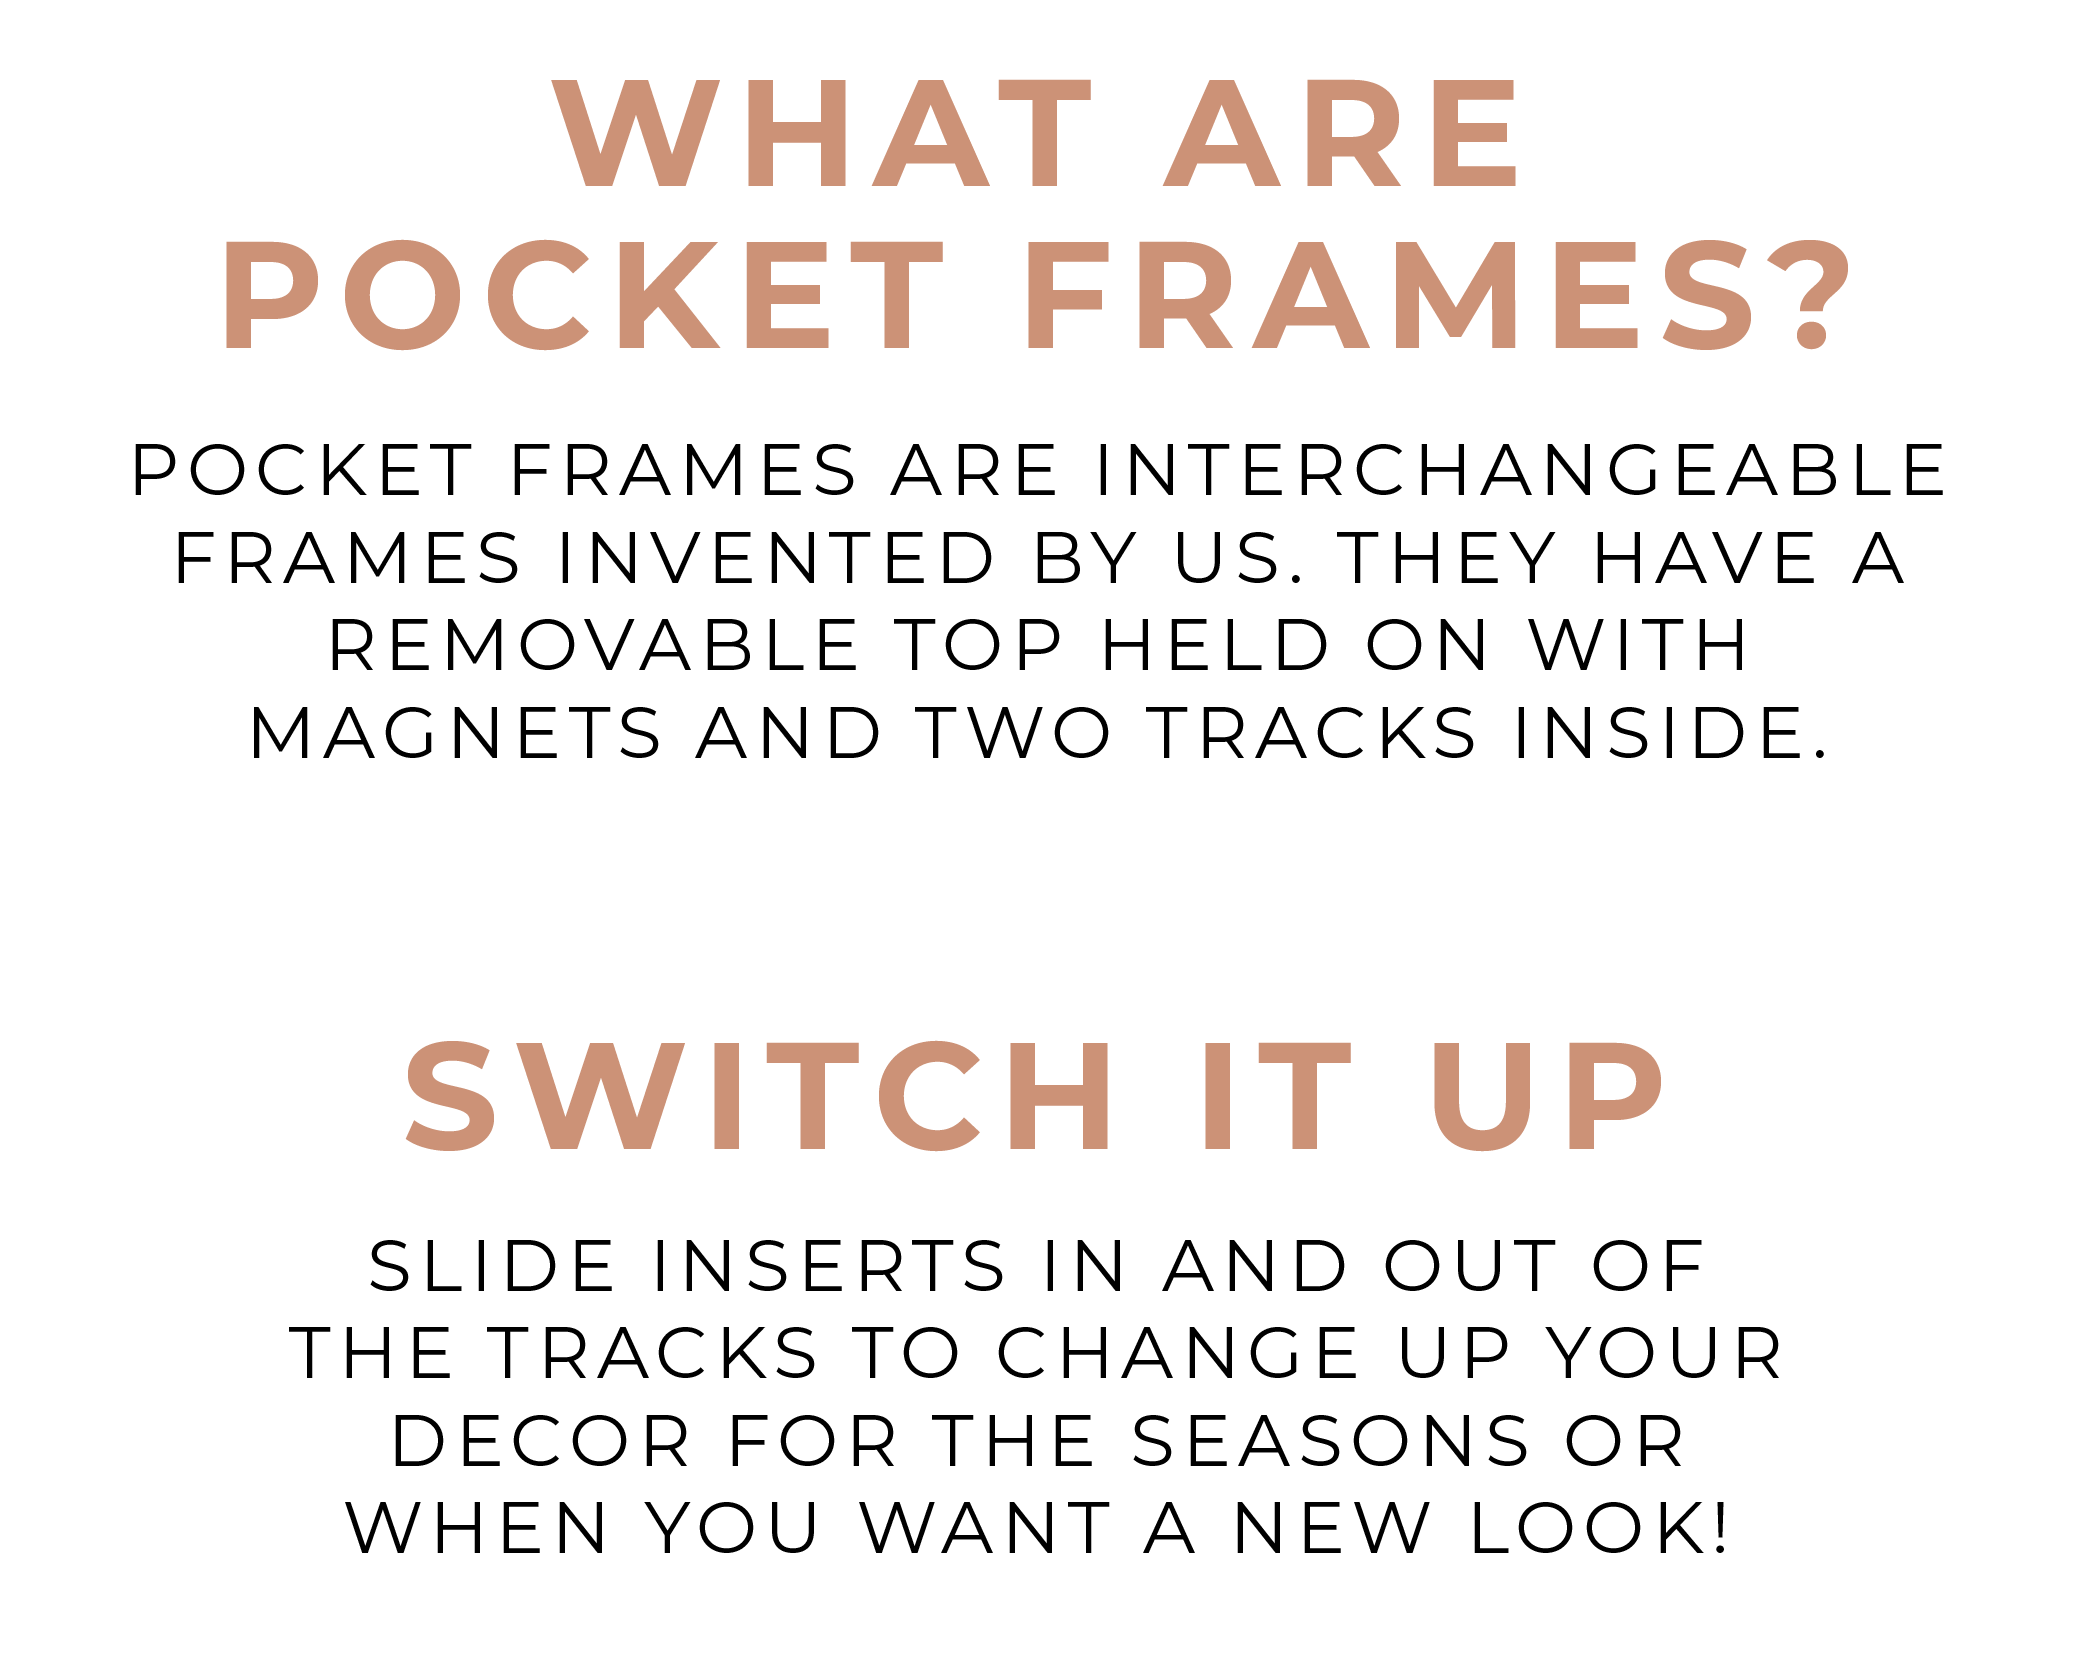 Pocket Frames are interchangeable frames invented by us. They have a removable top held on with magnets and two tracks inside. Slide inserts in and out of the tracks to change up your decor for the seasons or when you want a new look!